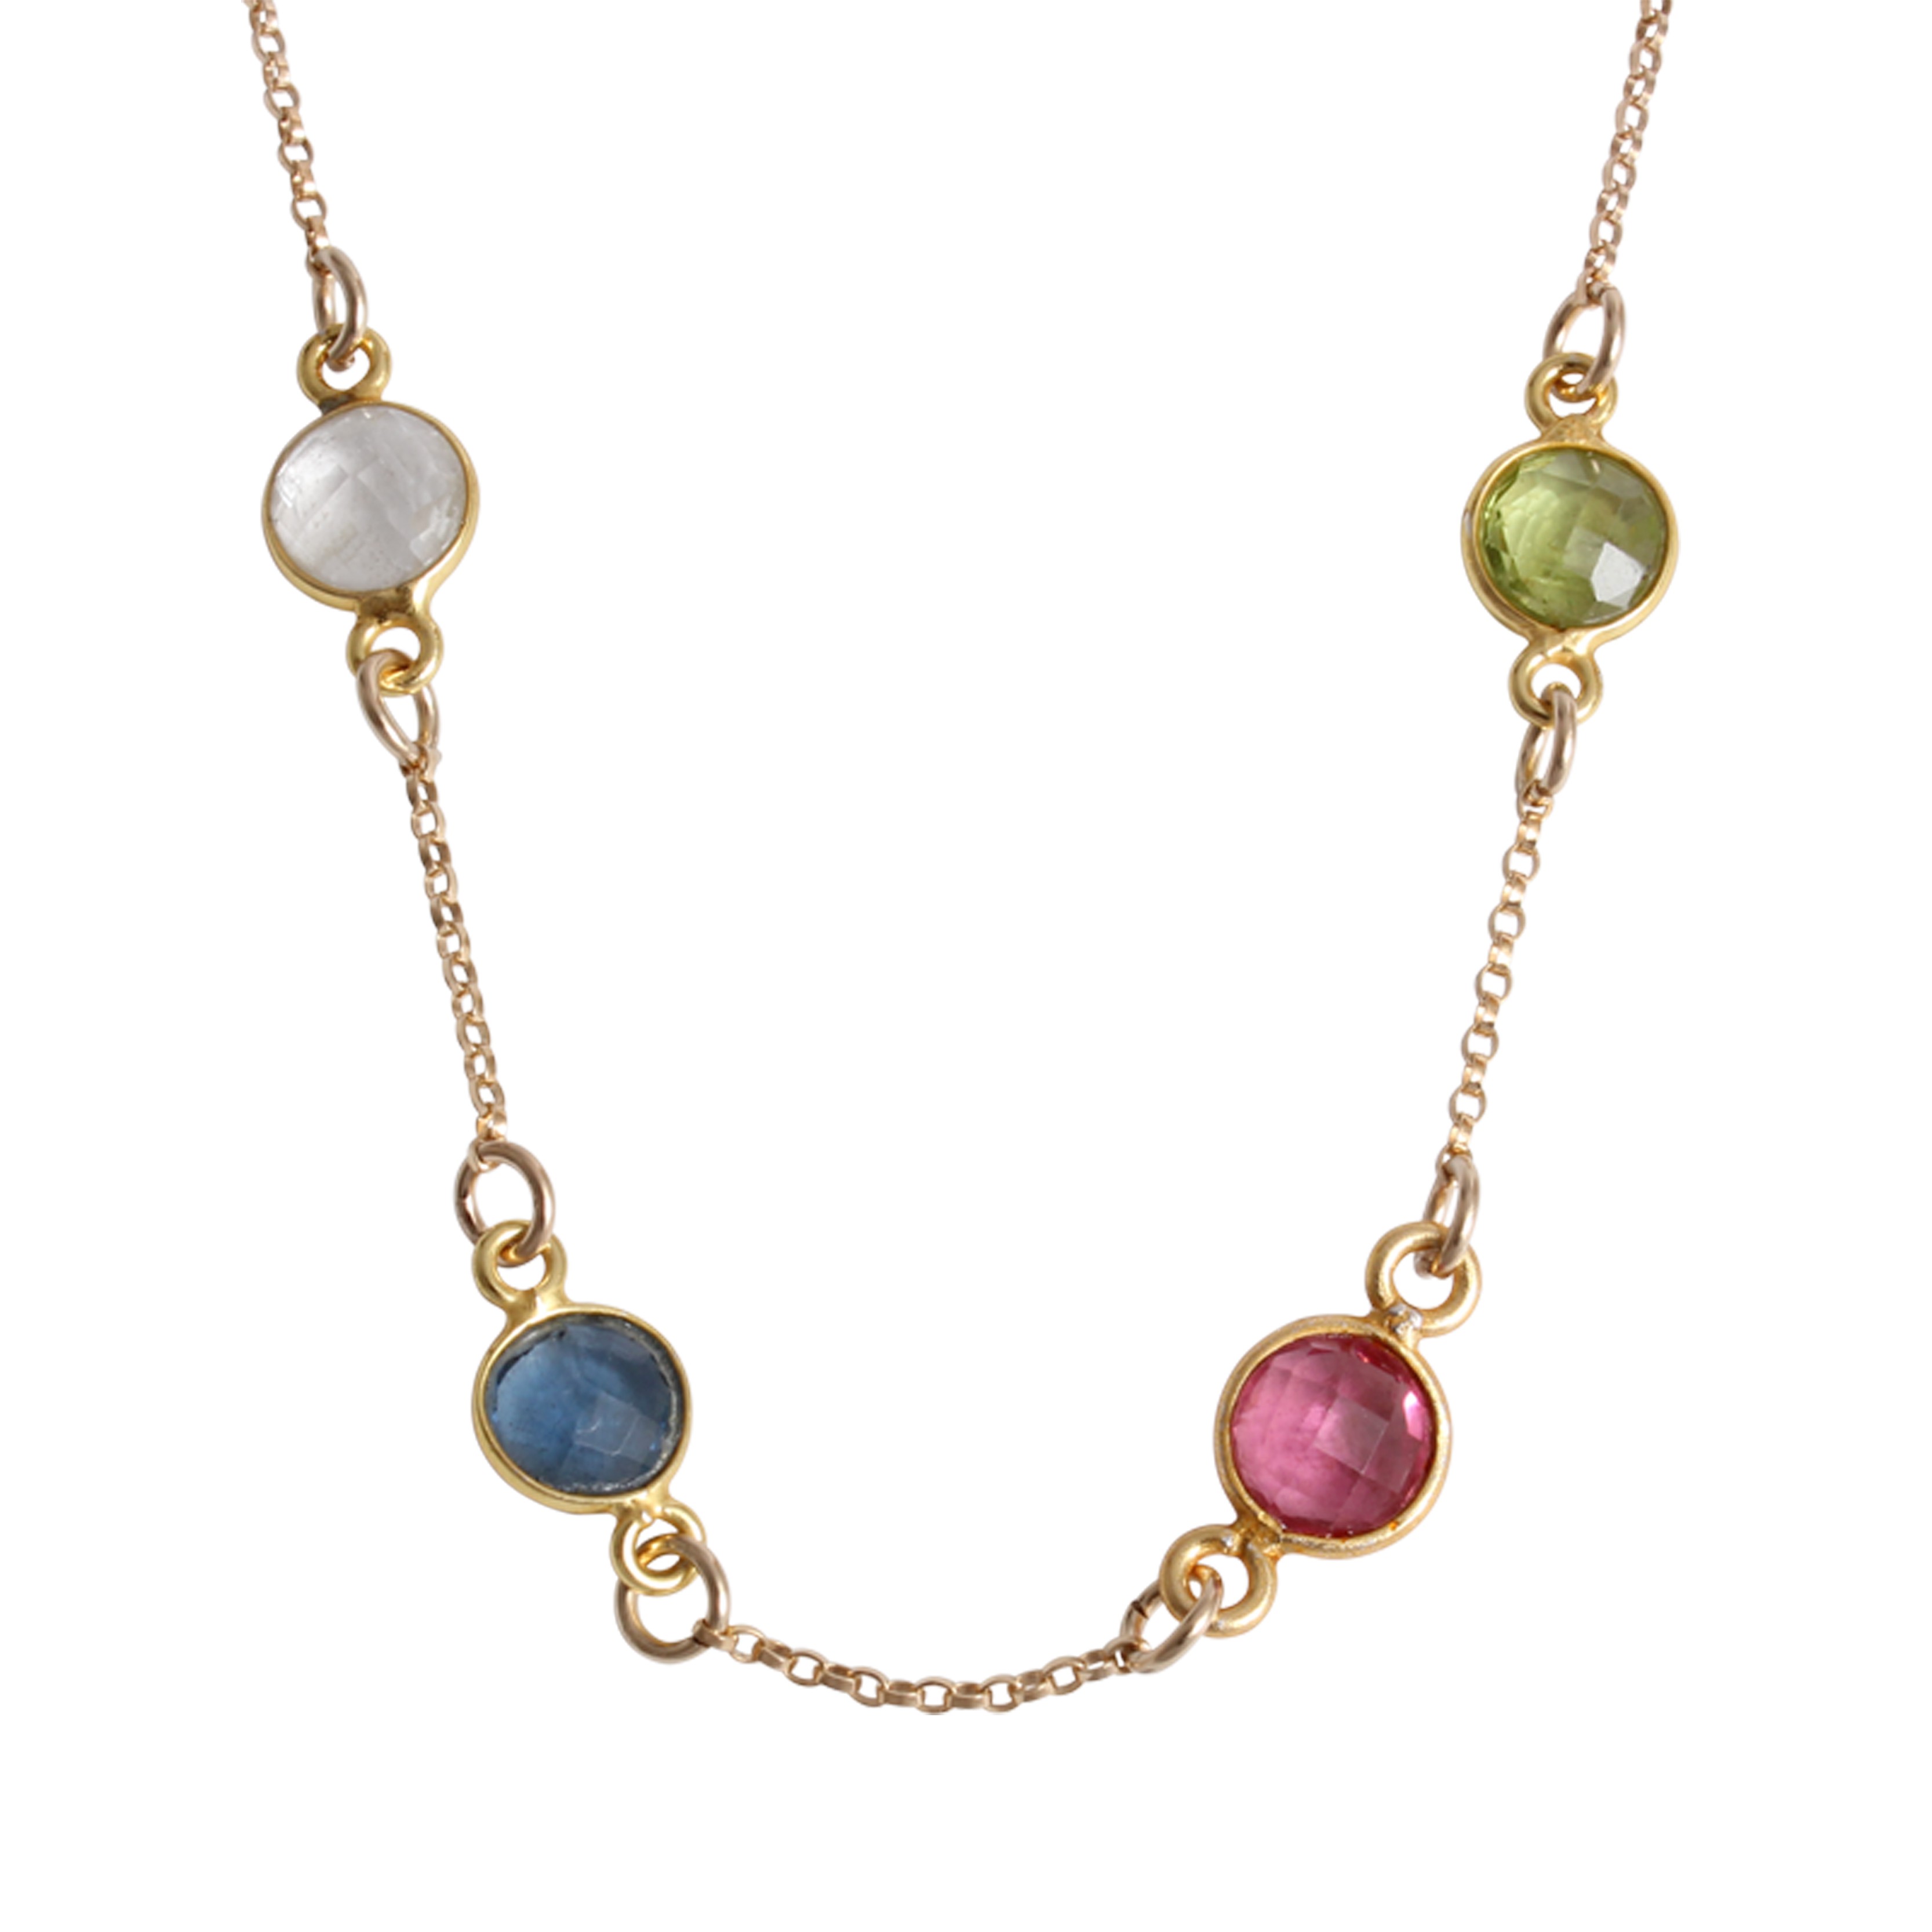 Mothers Birthstone Necklace Gold, Pride and Joy for Four Children